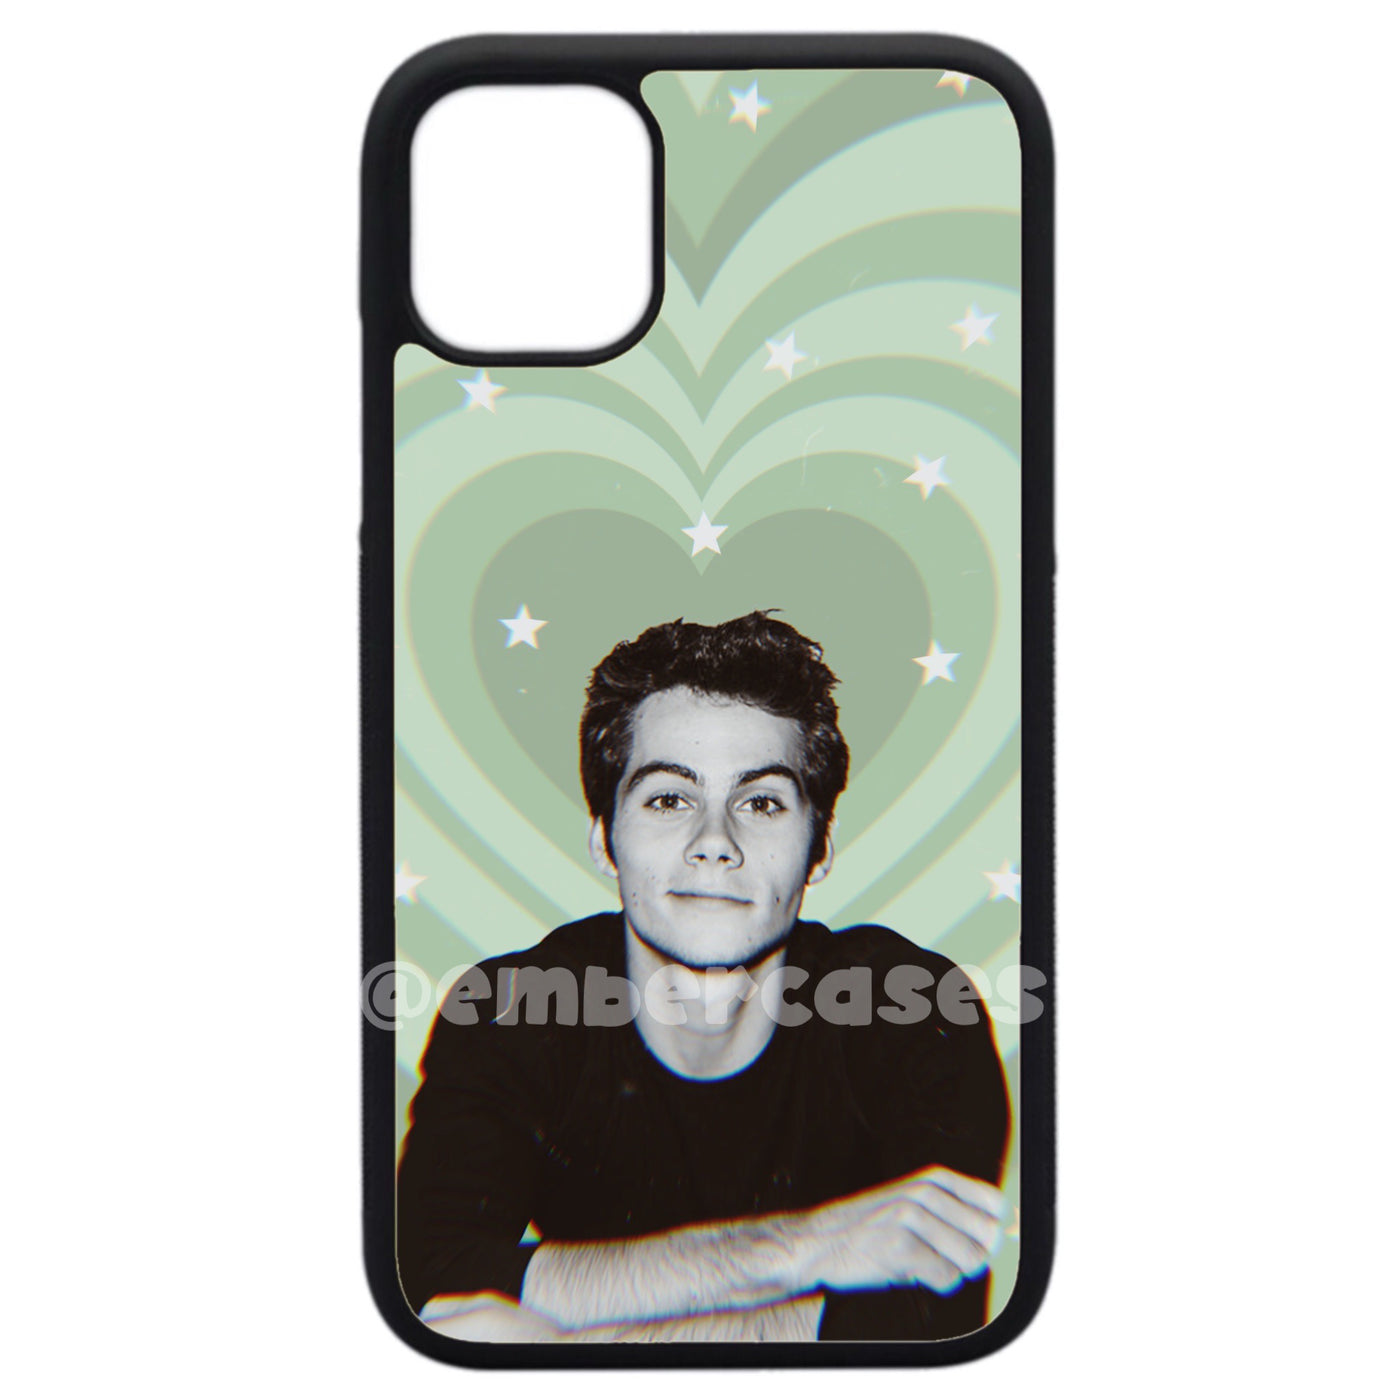 Dylan Hearts Case